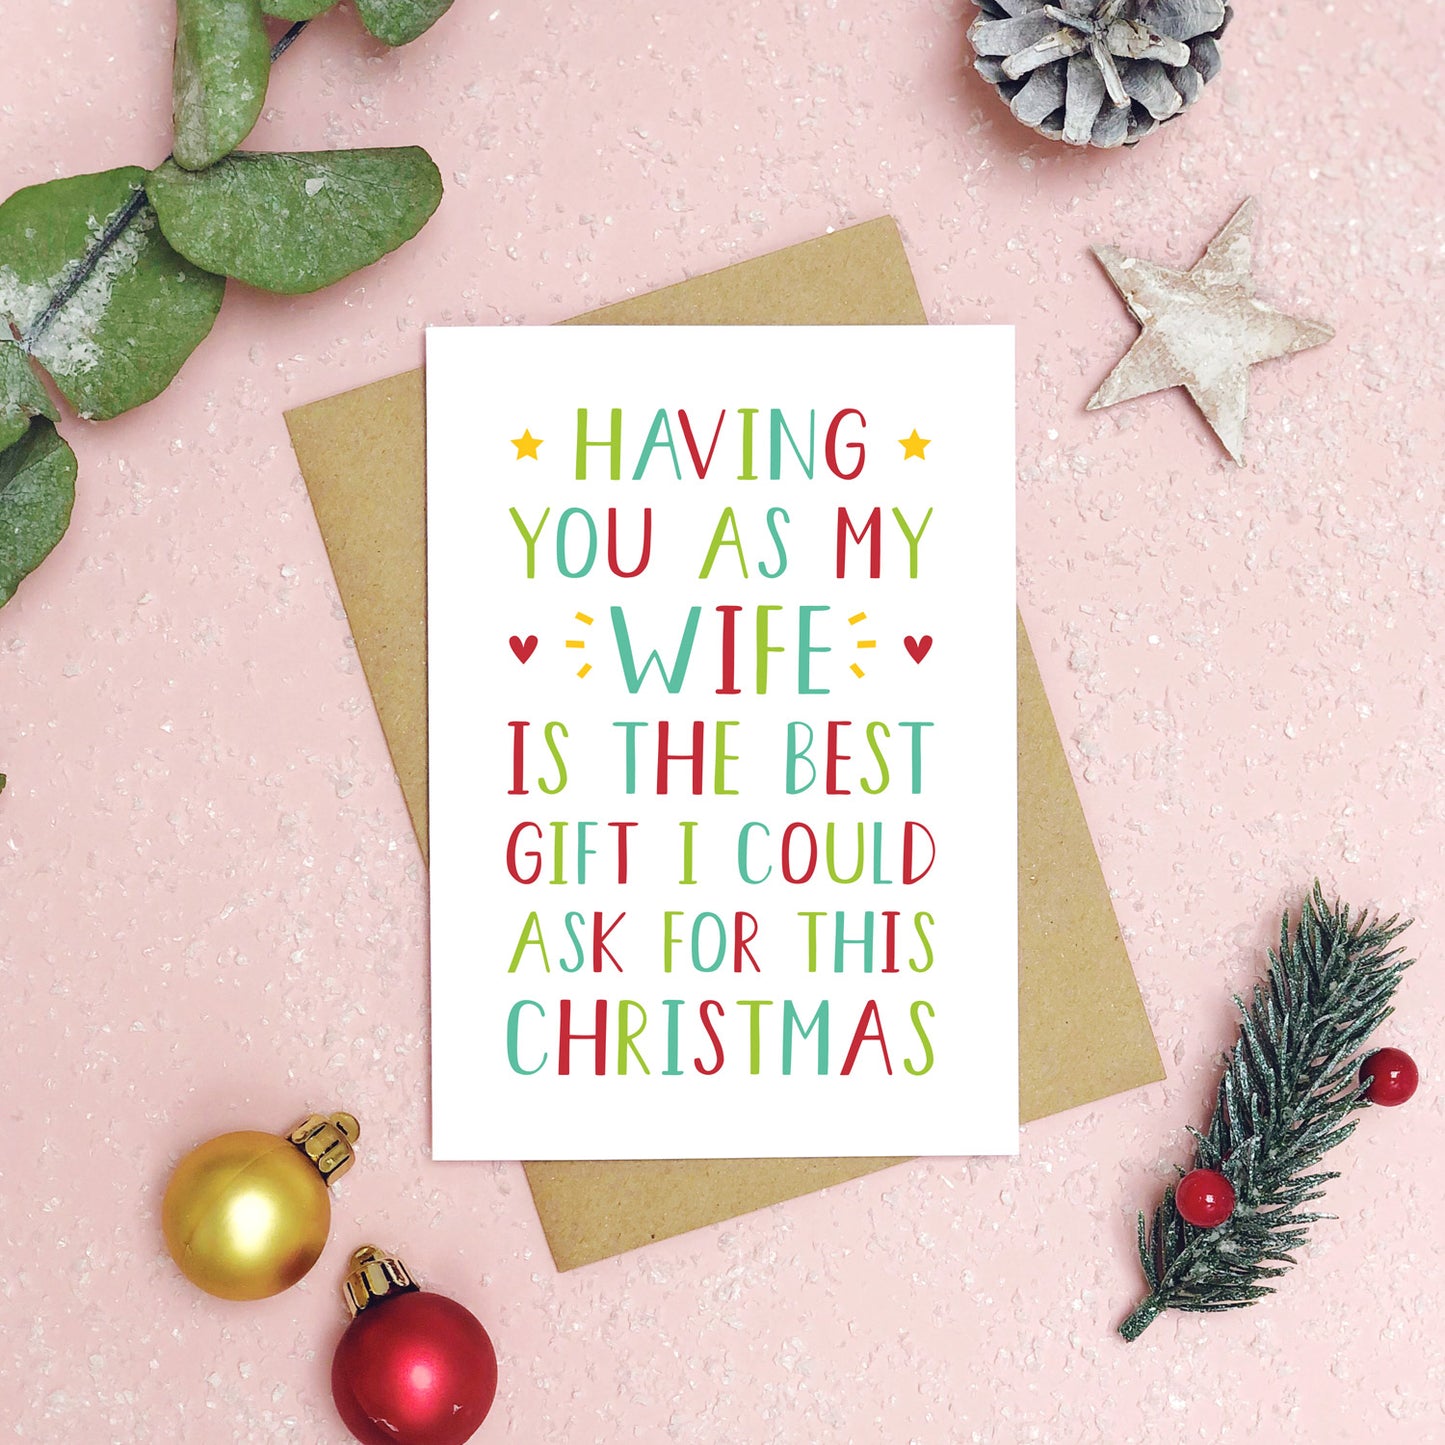 A 'best gift' wife Christmas card has been shot on a pink background with foliage, baubles and Christmas props surrounding the card. The writing on the card is red and green.